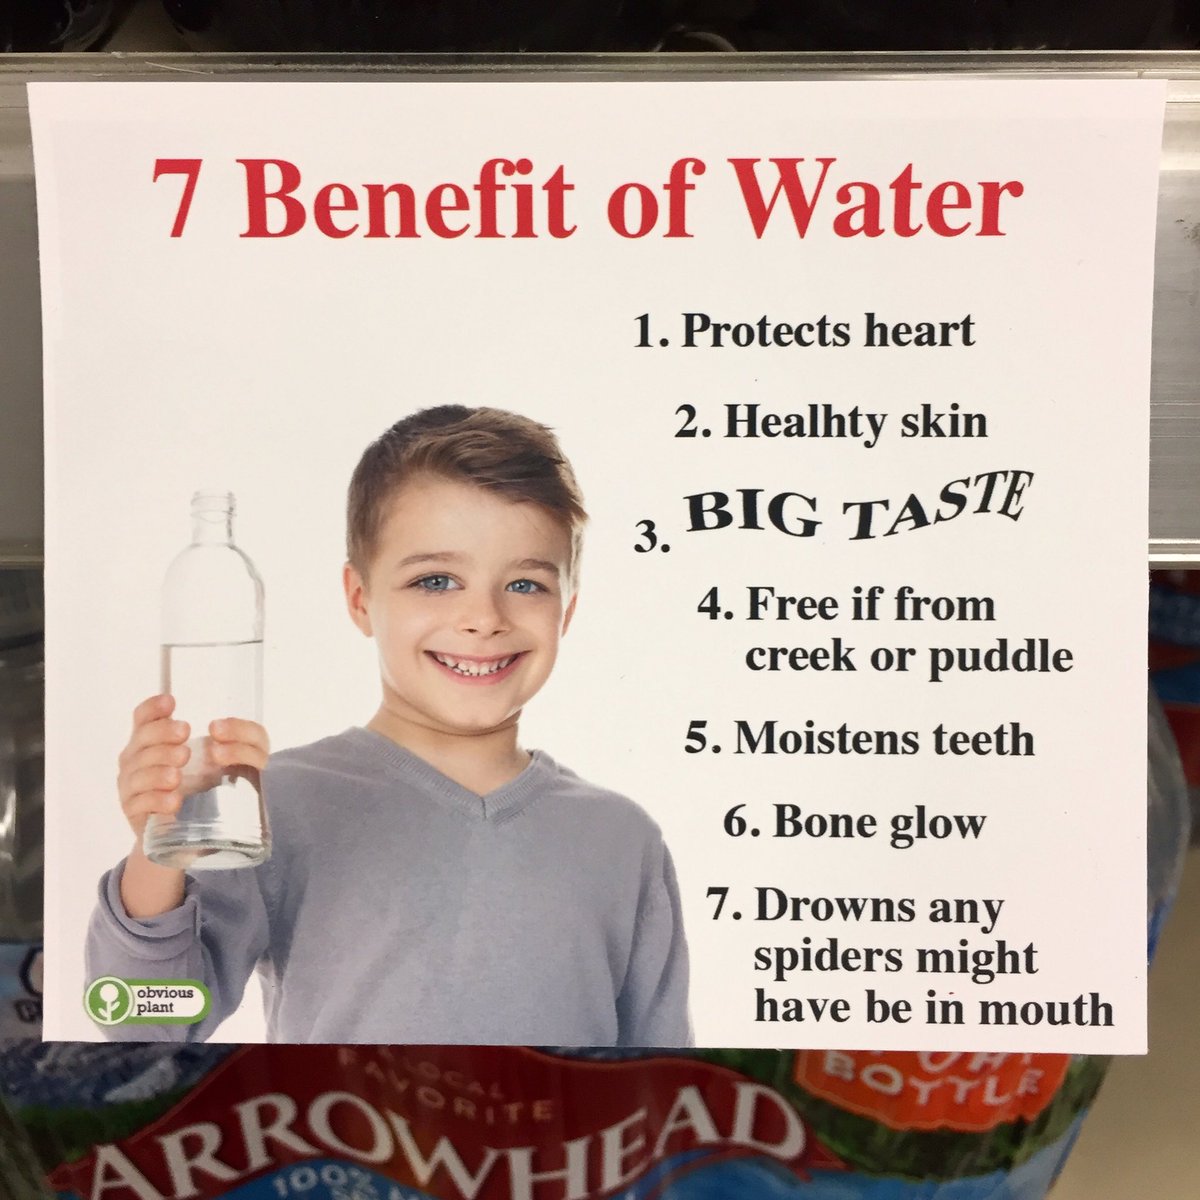 water water-memes water text: 7 Benefit of Water plant 1. Protects heart 2. Healhty skin 4. Free if from creek or puddle 5. Moistens teeth 6. Bone glow 7. Drowns any spiders might have be in mouth 